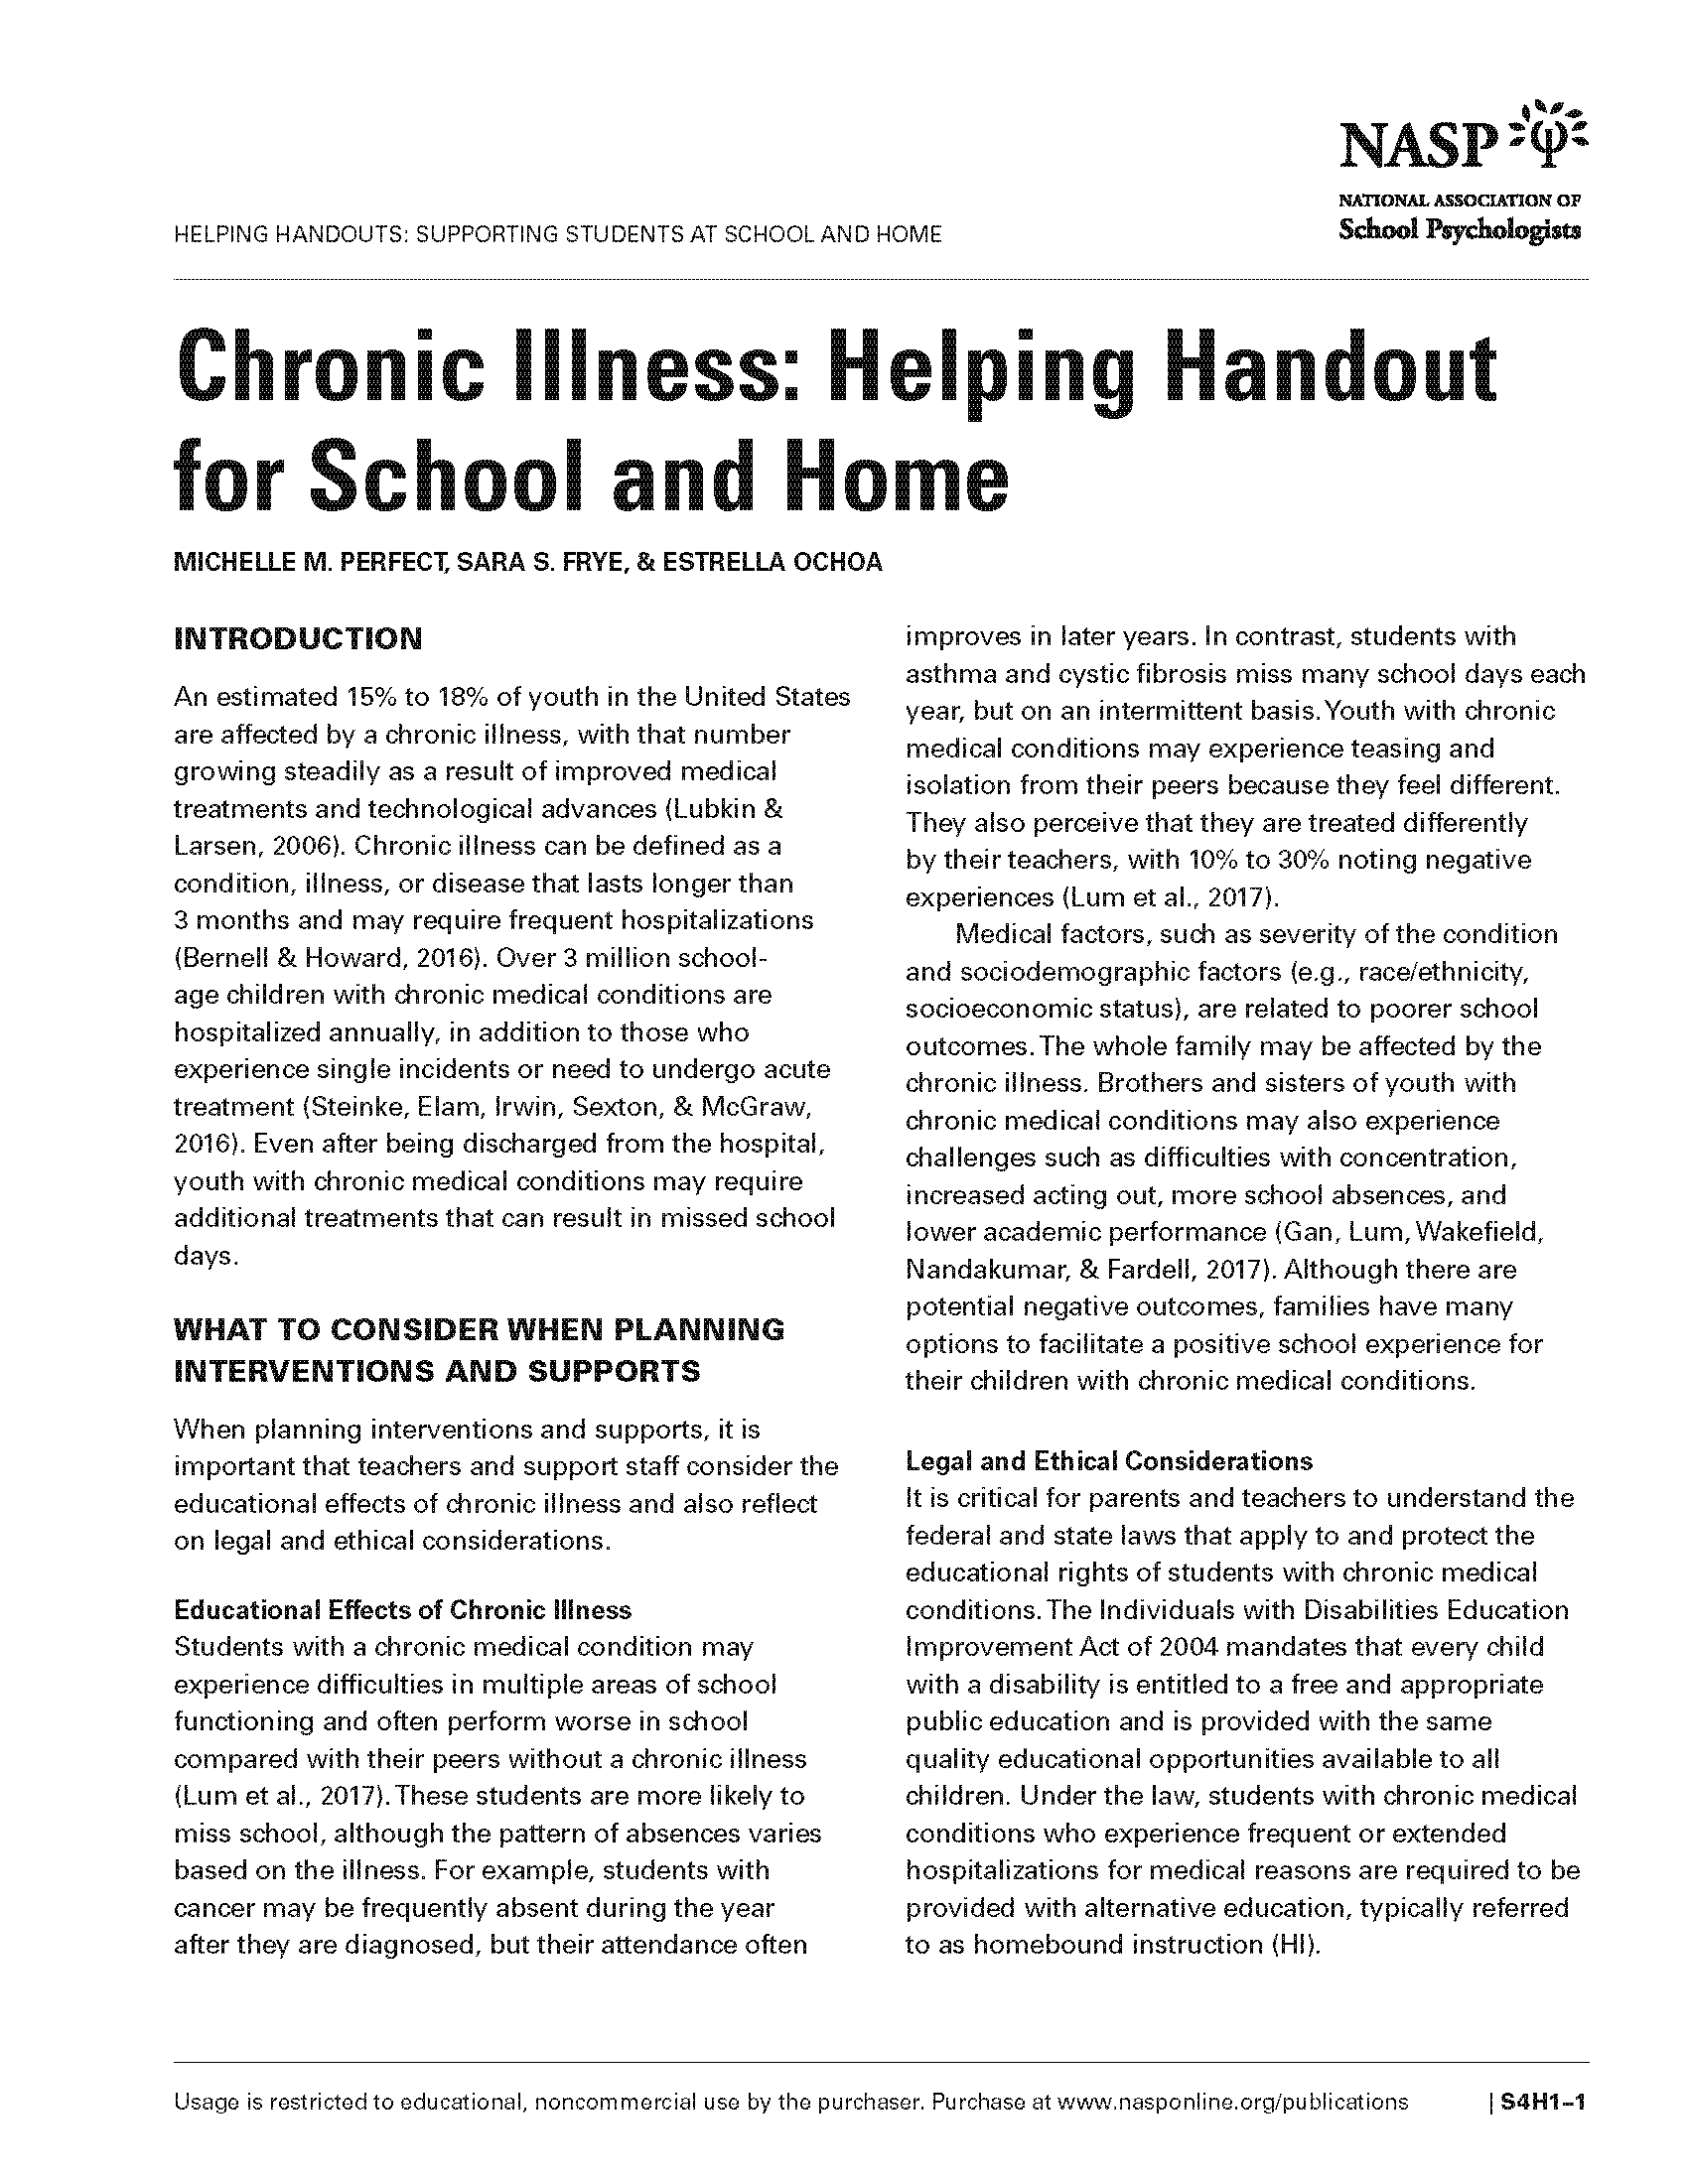 Chronic Illness: Helping Handout for School and Home 